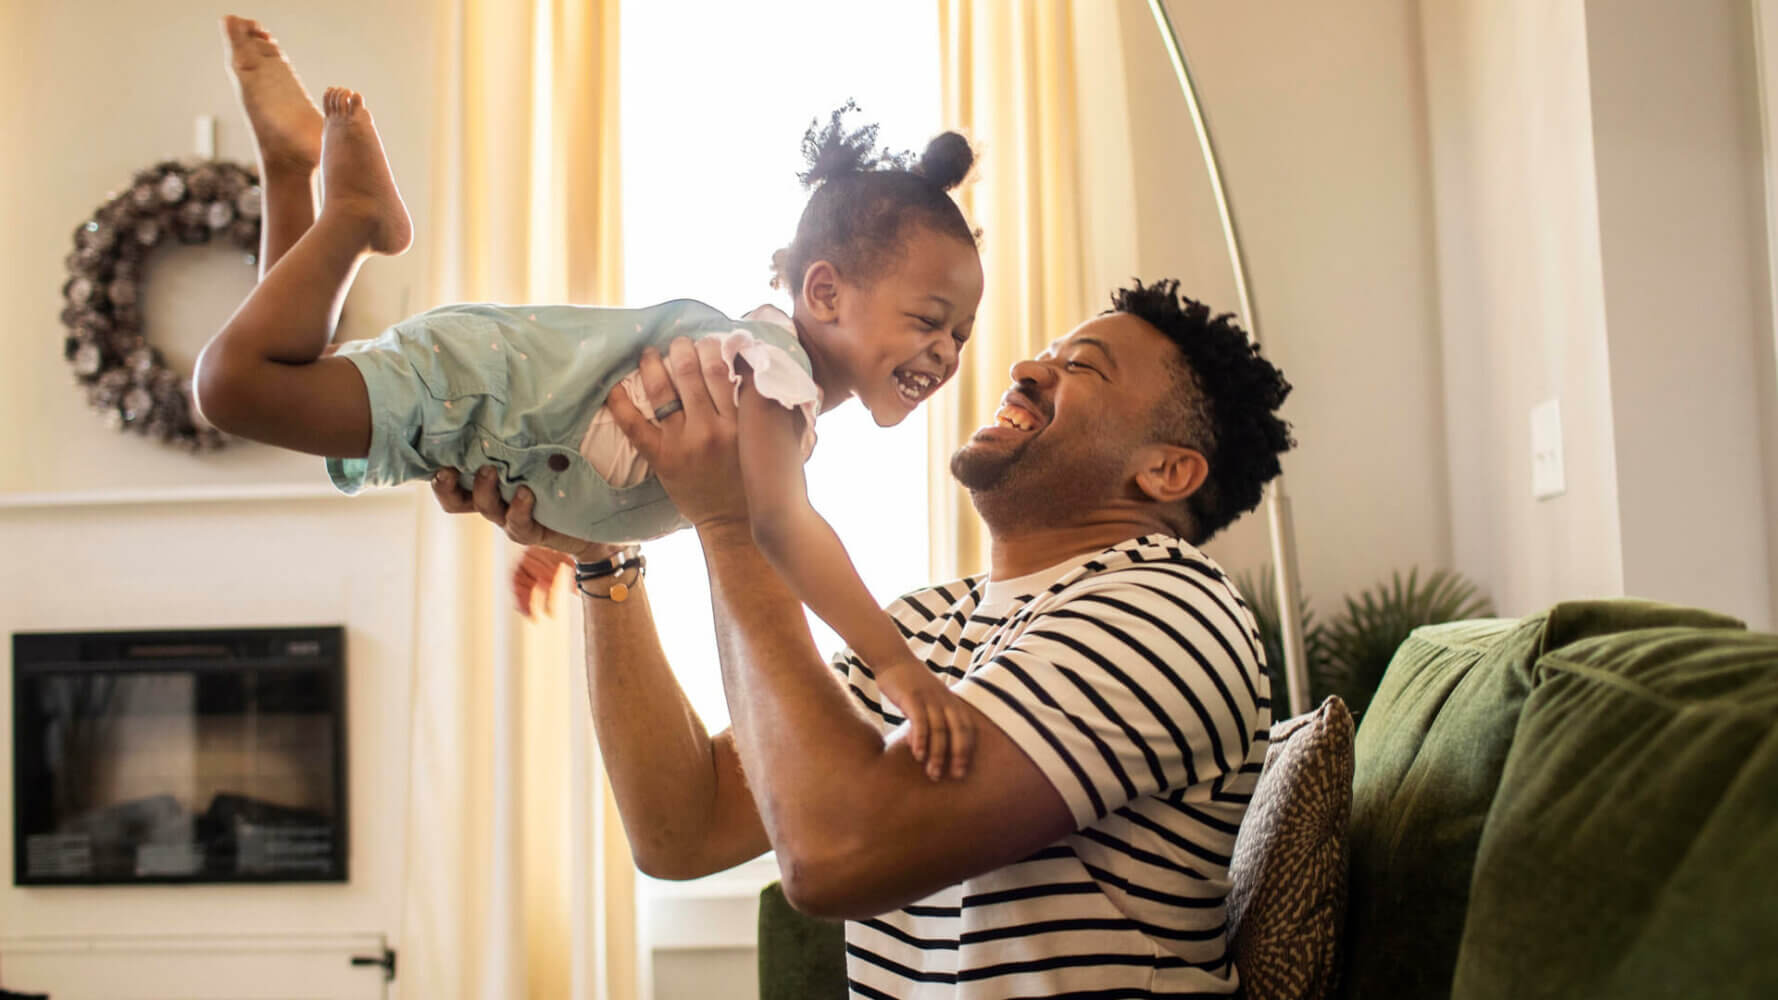 Father lifting toddler daughter in the air, values